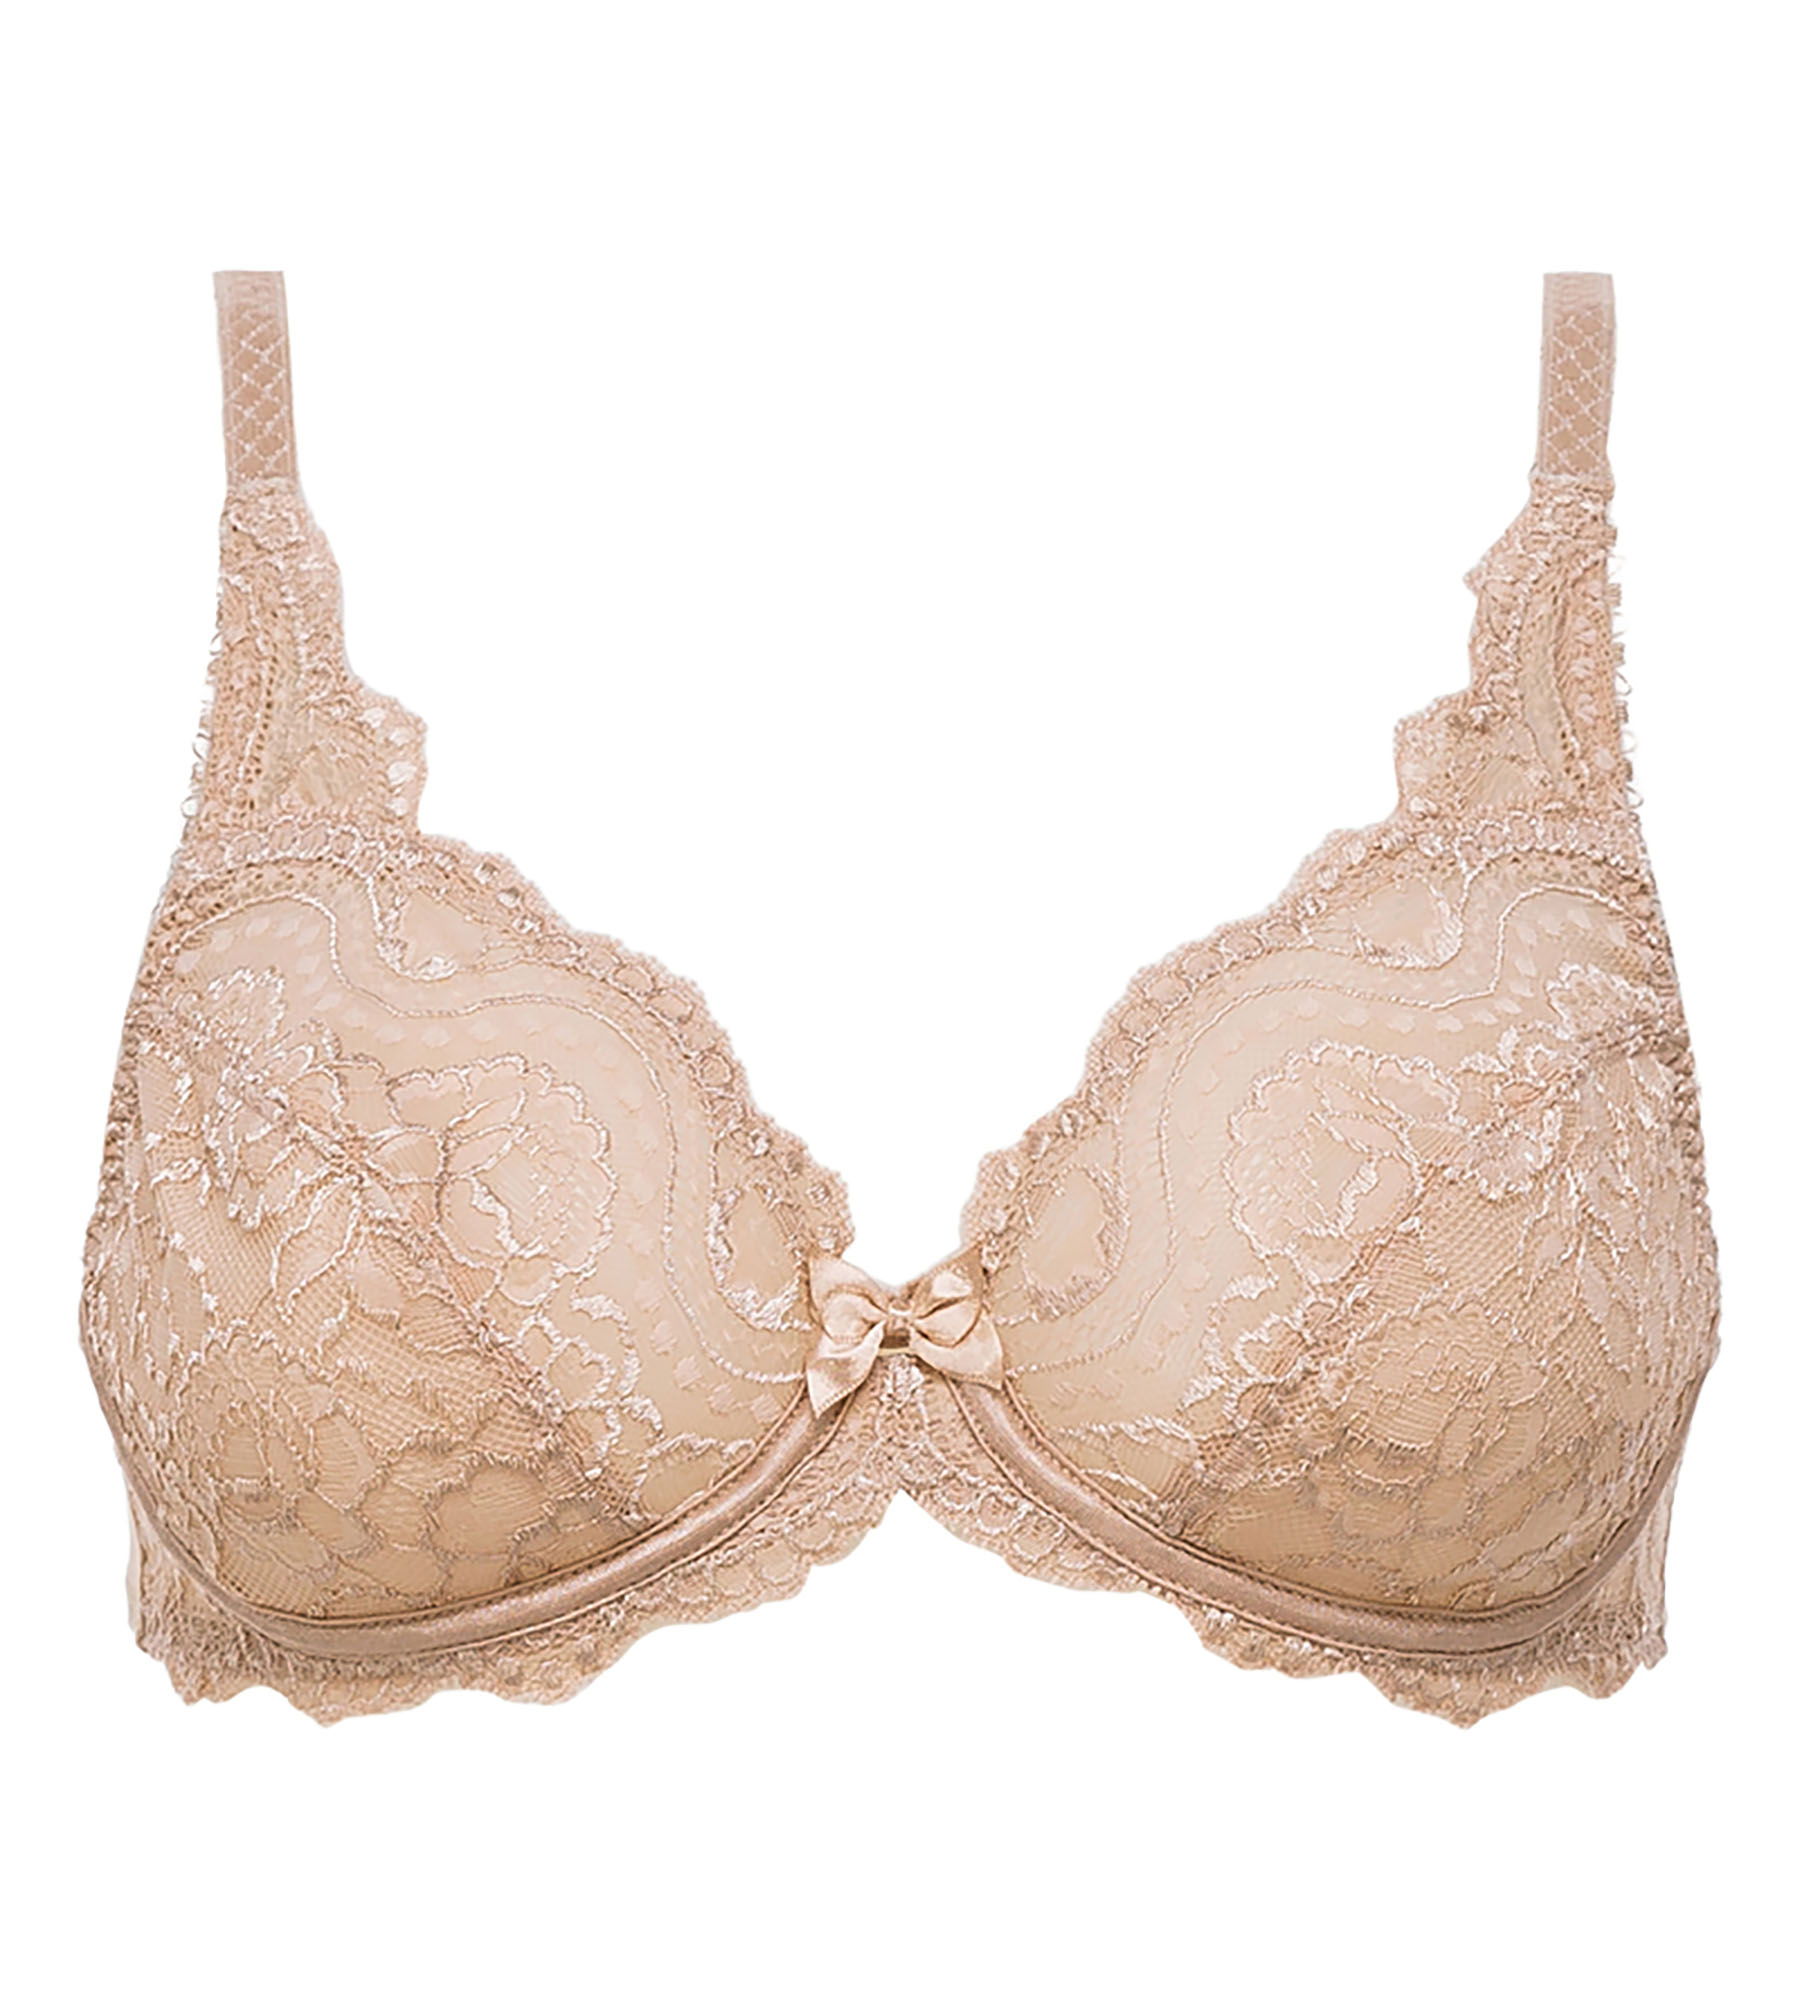 RYRJJ Push Up Bras for Women Embroidered Floral Print Full-Coverage Wireless  Shaping Cup Everyday Bra Comfort No Underwire Bralette(Beige,S) 